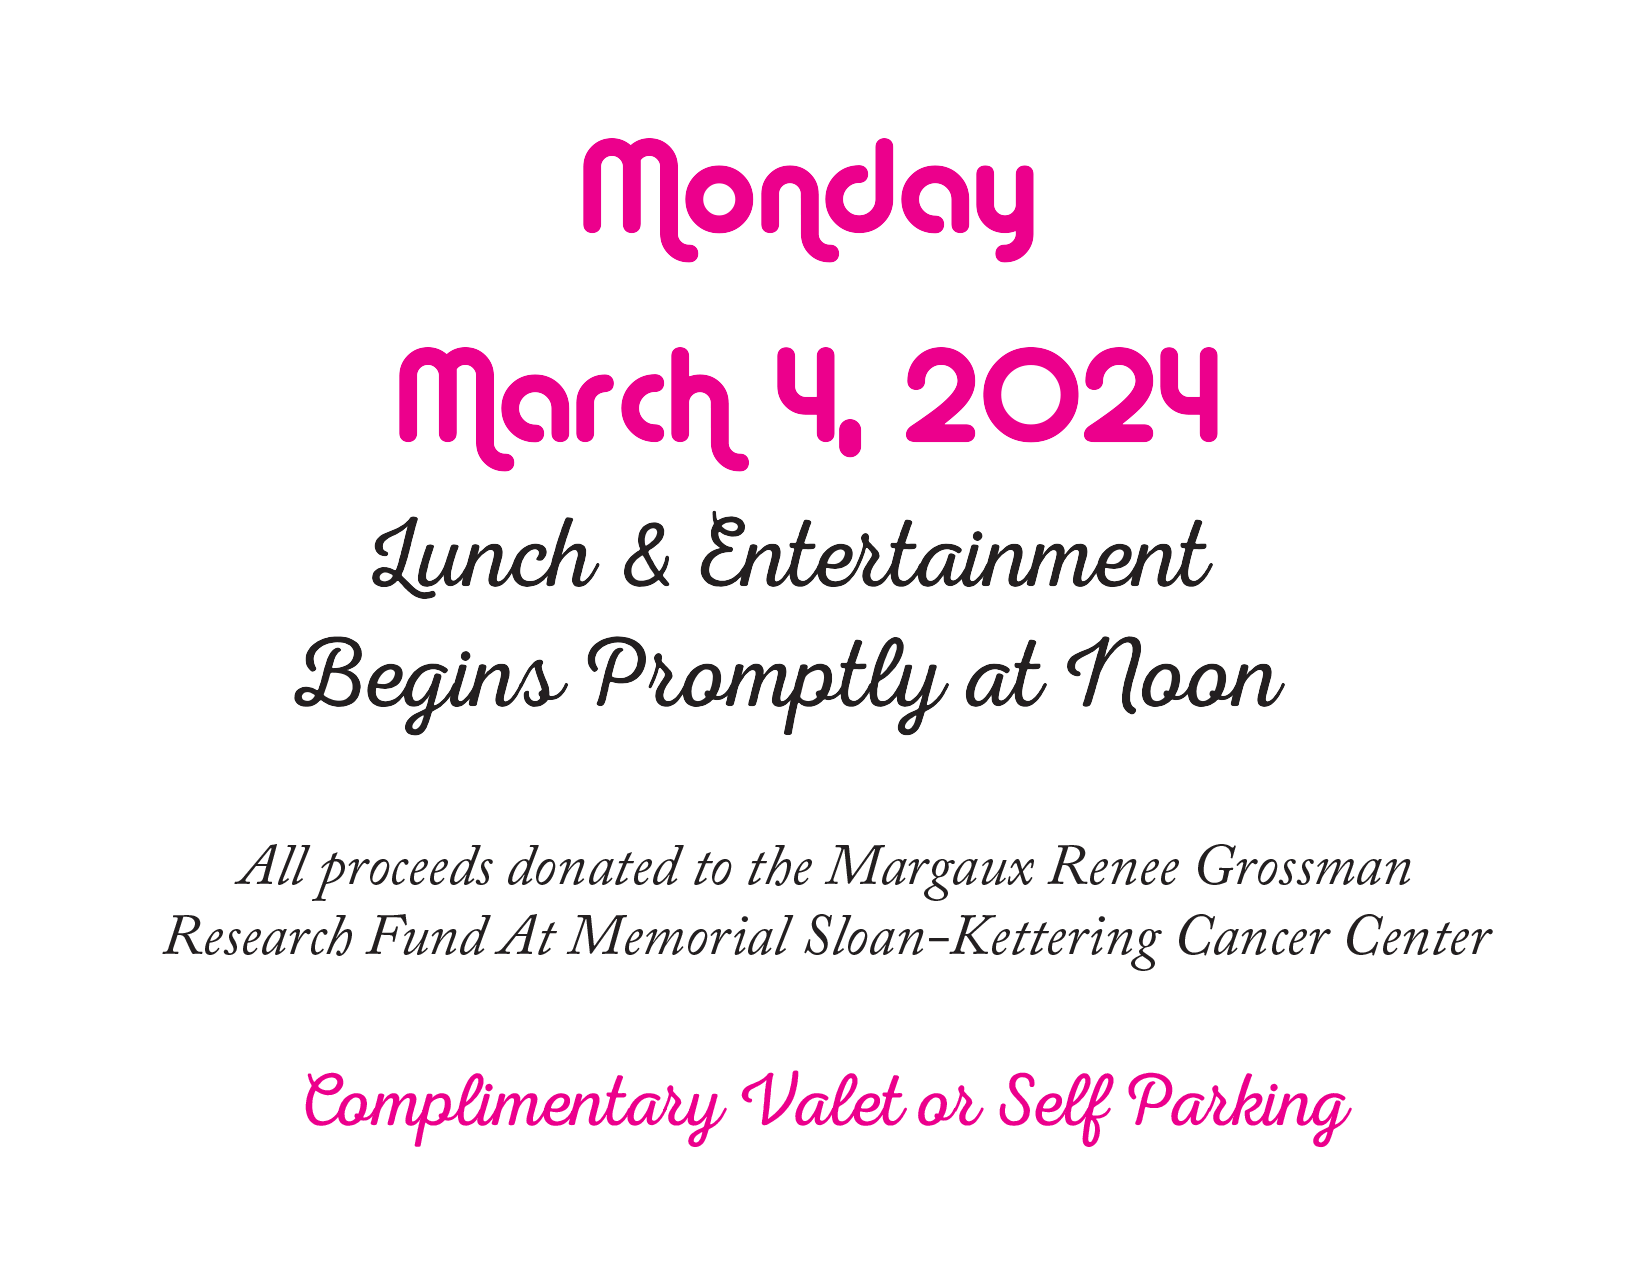  Monday March 4, 2024  Lunch &amp; Entertainment  Begins Promptly at Noon  All proceeds donated to the Margaux Renee Grossman Research Fund At Memorial Sloan-Kettering Cancer Center  Complimentary Valet or Self Parking 